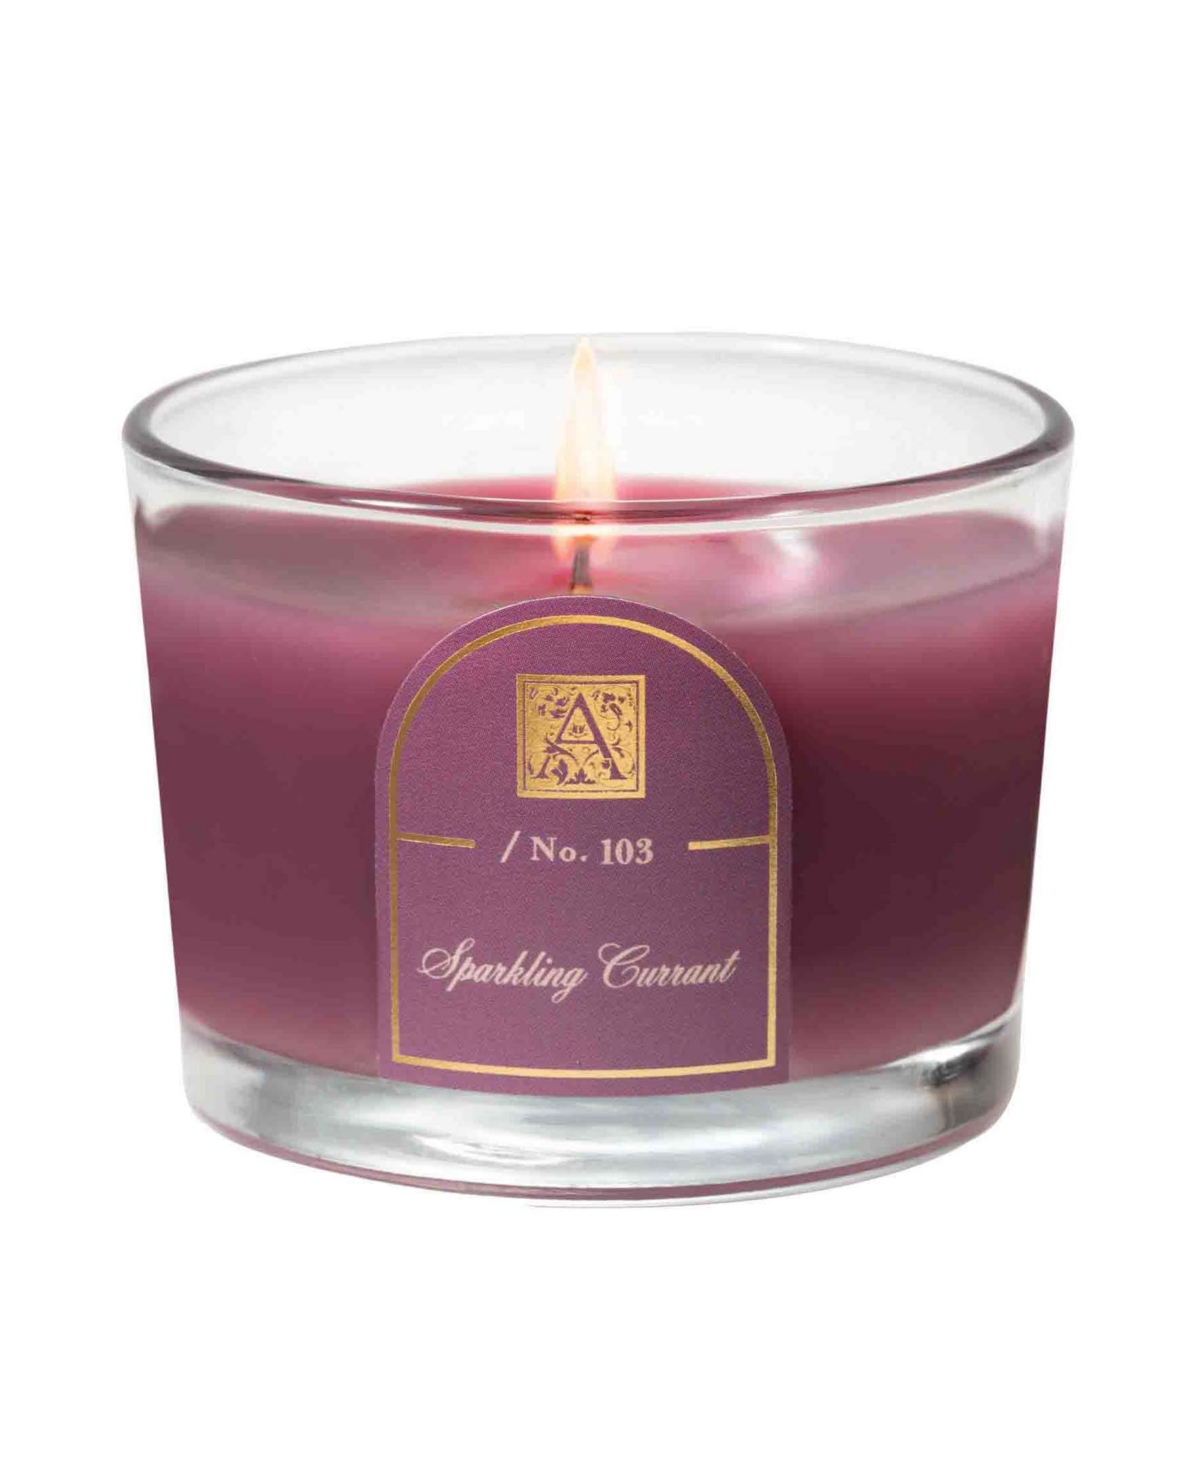 Aromatique Sparkling Currant Petite Tumbler Glass Candle In Clear Glass Candle